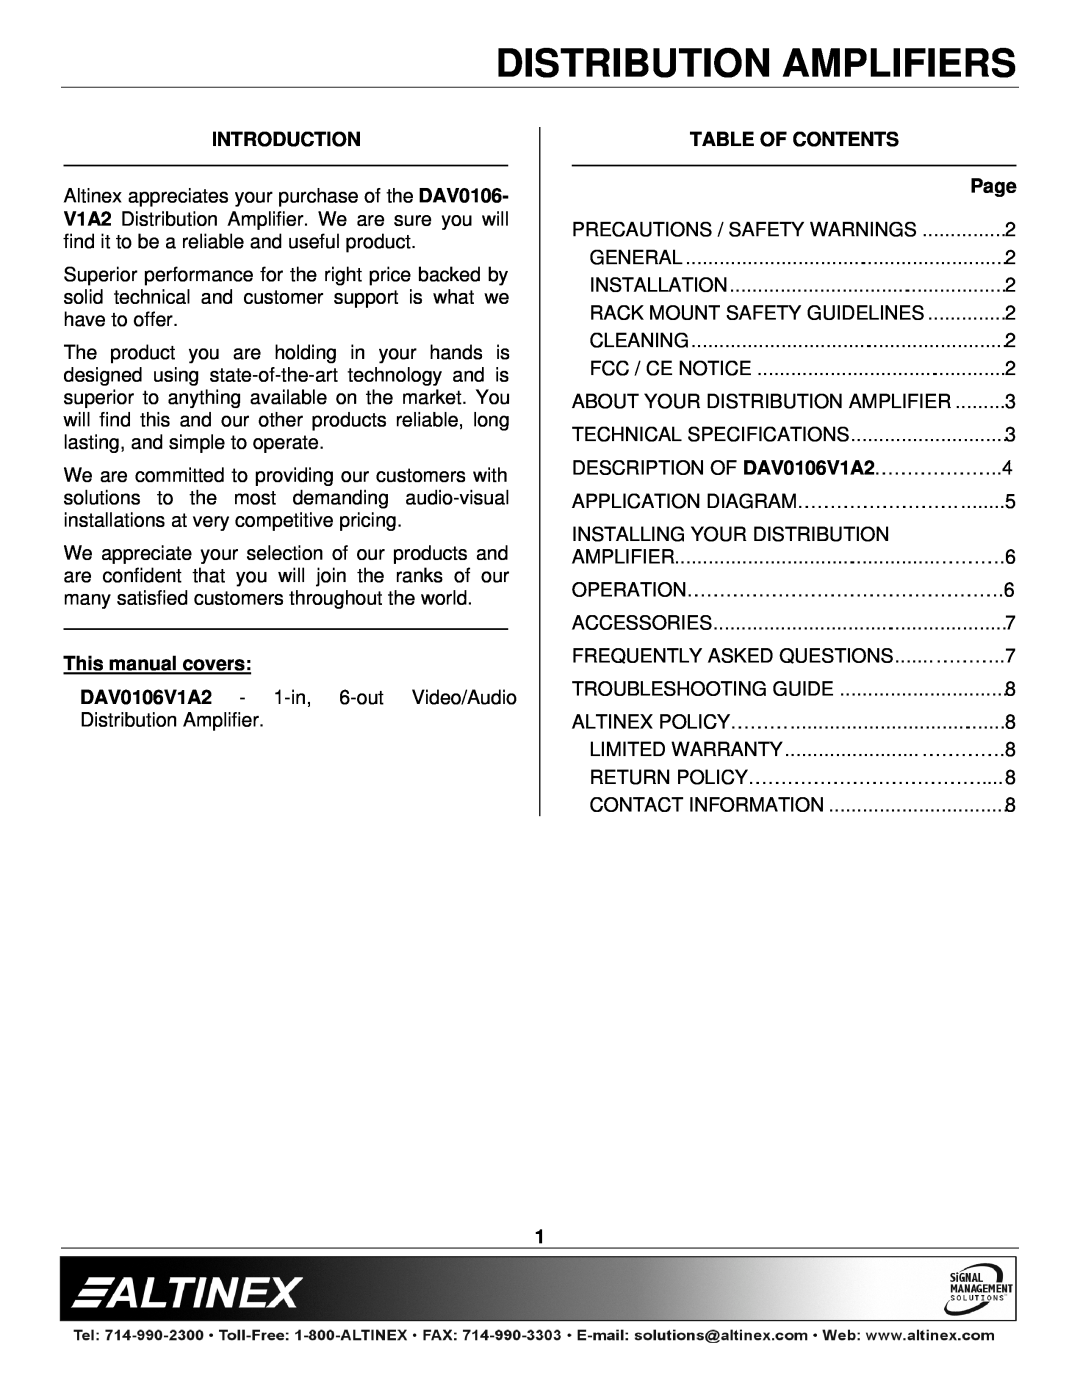 Altinex DAV0106-V1A2 Introduction, This manual covers, Table Of Contents, Page, Distribution Amplifiers 